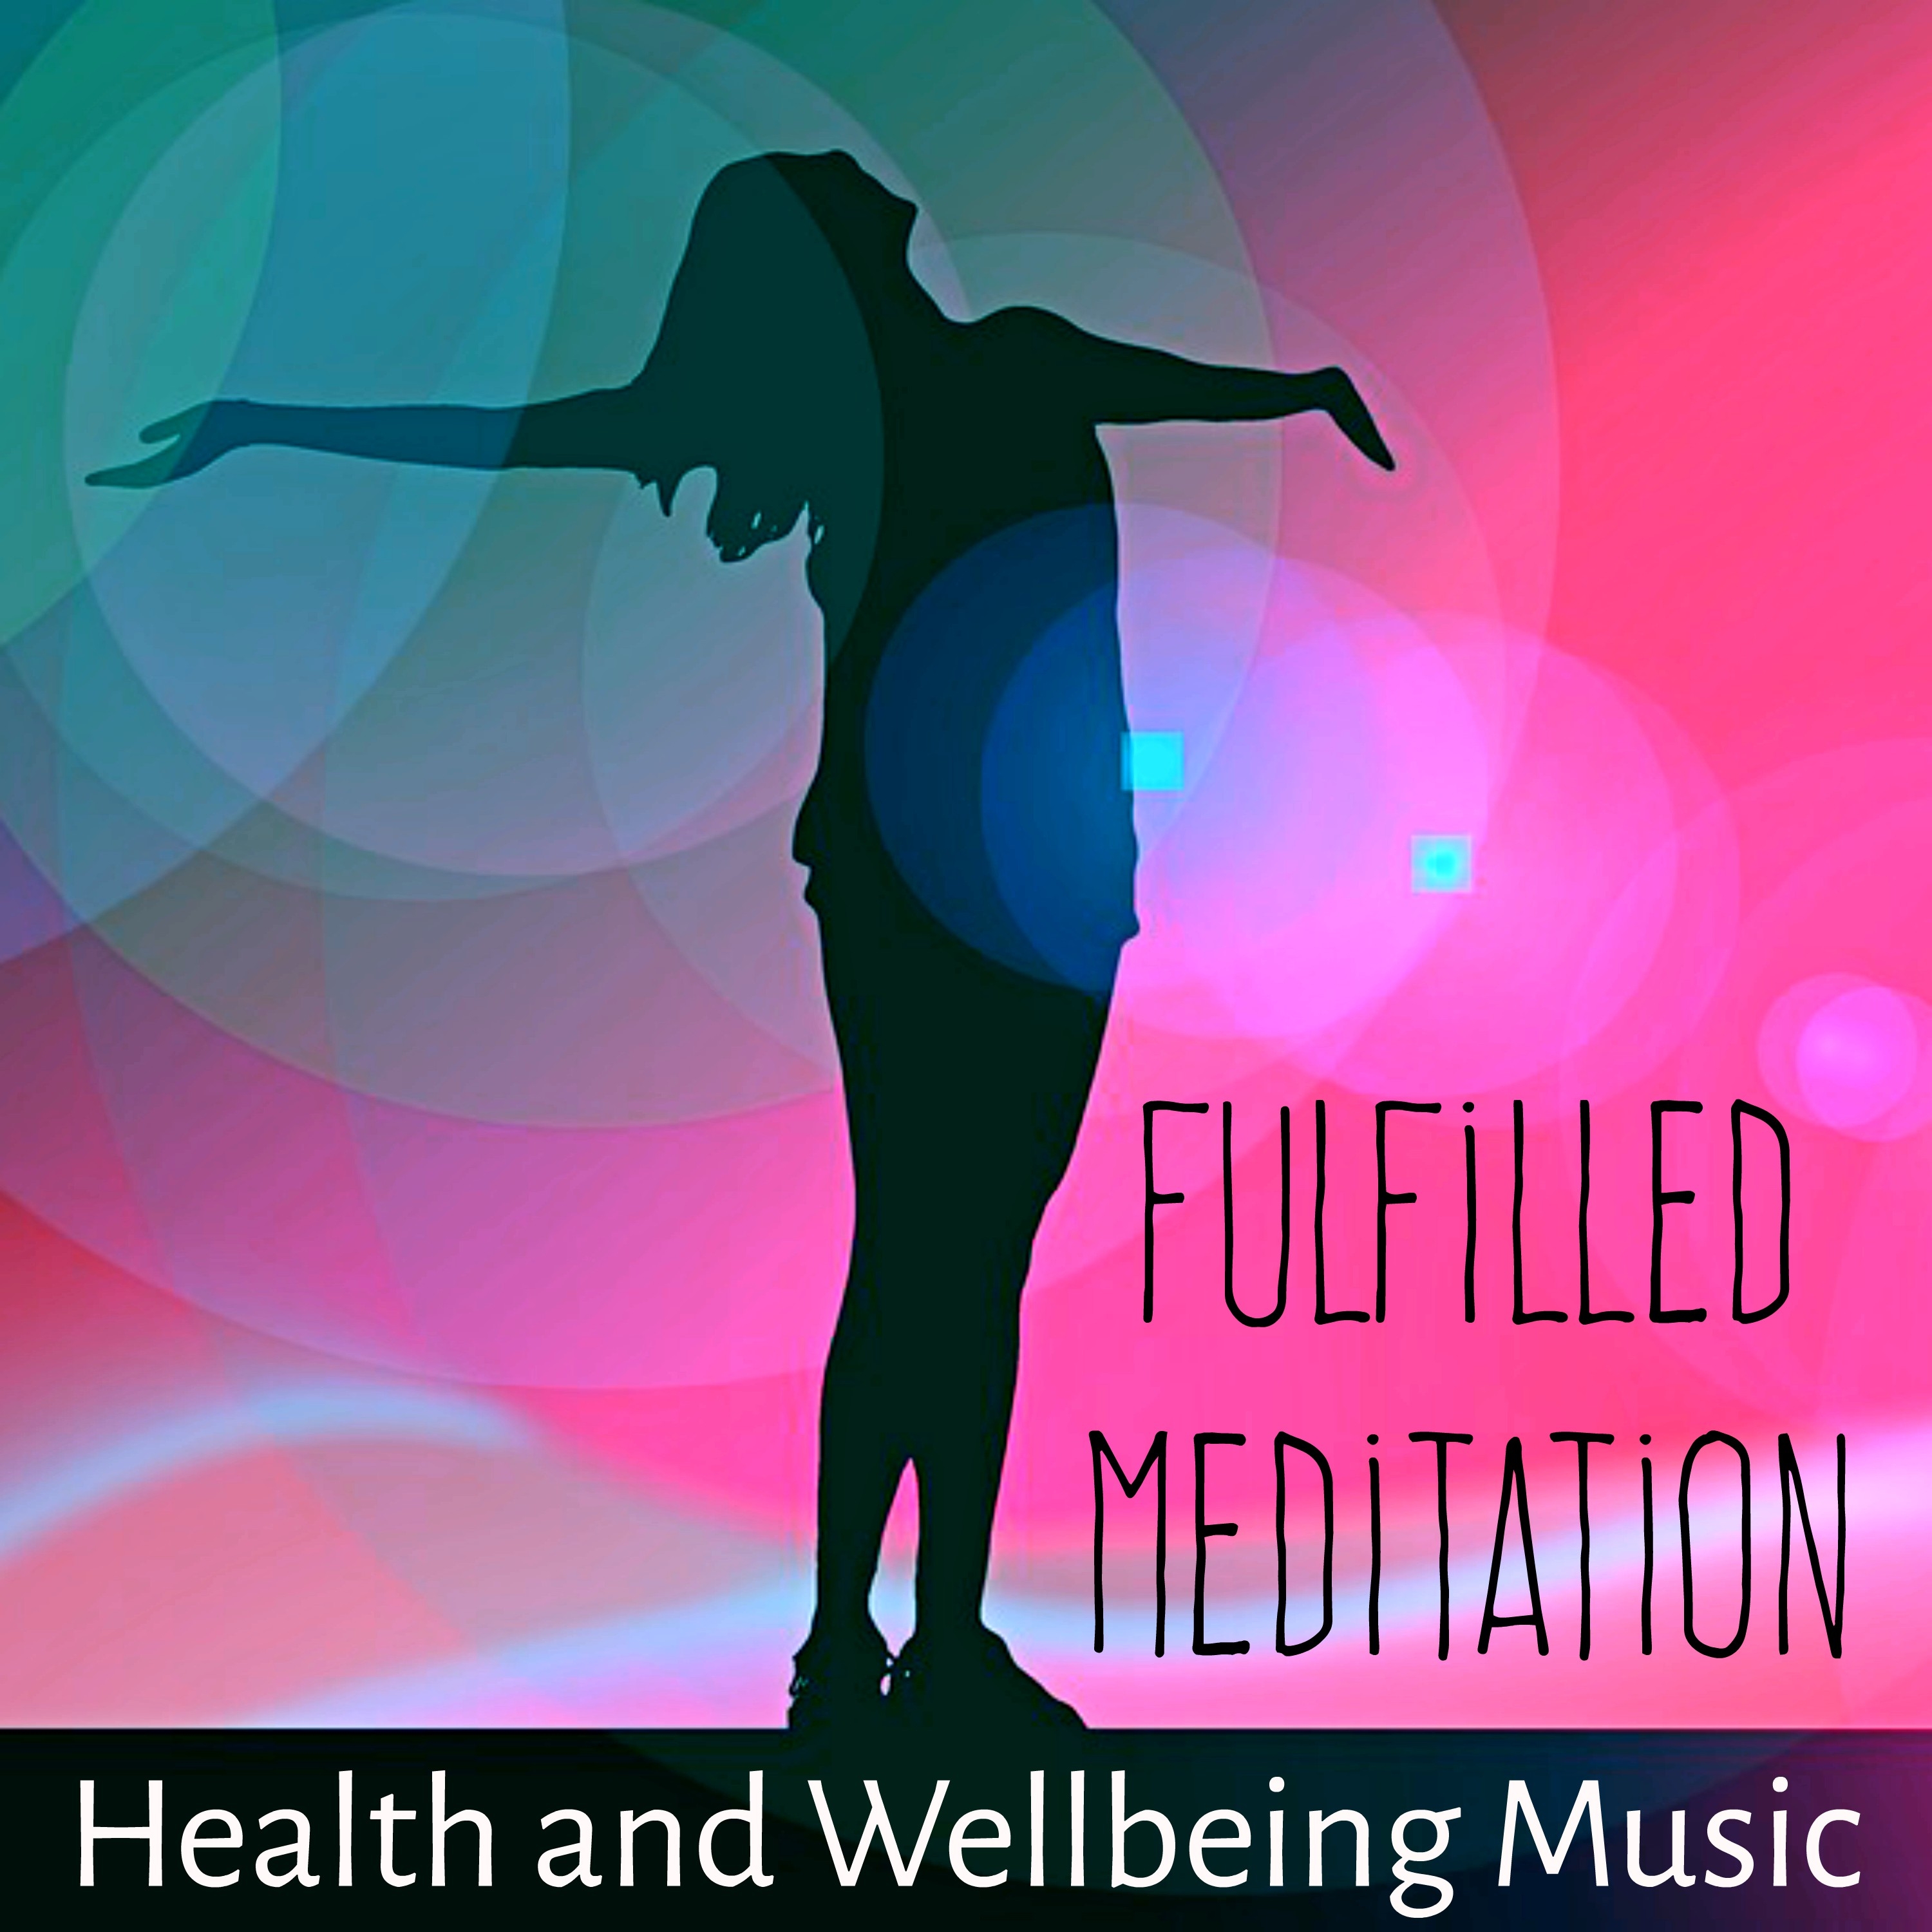 Fulfilled Meditation - Brainwave Generator Problem Solving Insomnia Treatment Health and Wellbeing Music with Nature New Age Sounds